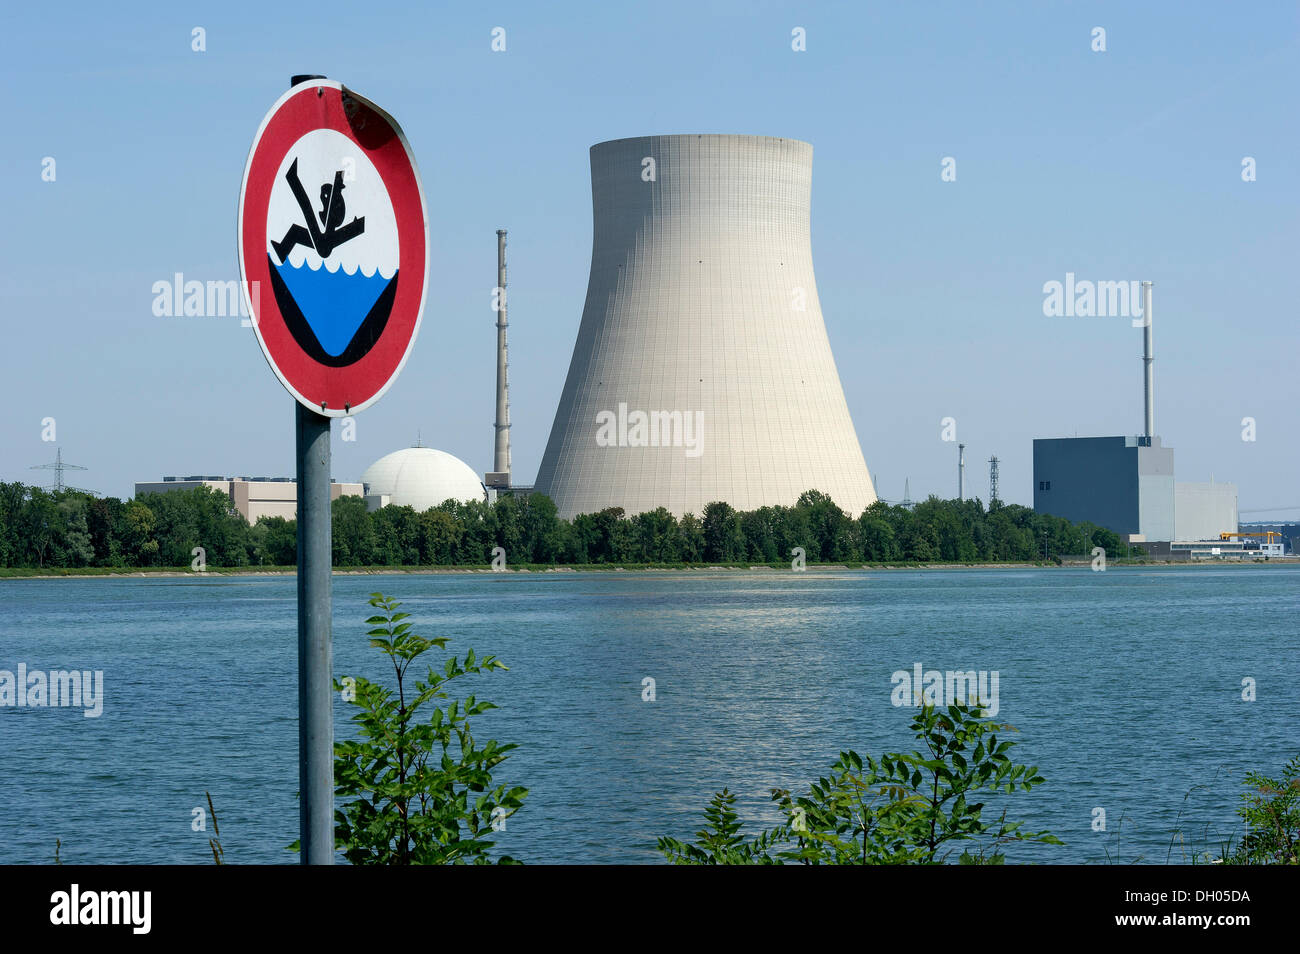 Prohibition sign, warning sign for dangerous waters, Nuclear Power Plant Isar 1, Niederaichbach Reservoir, Ohu, Lkr. Landshut Stock Photo